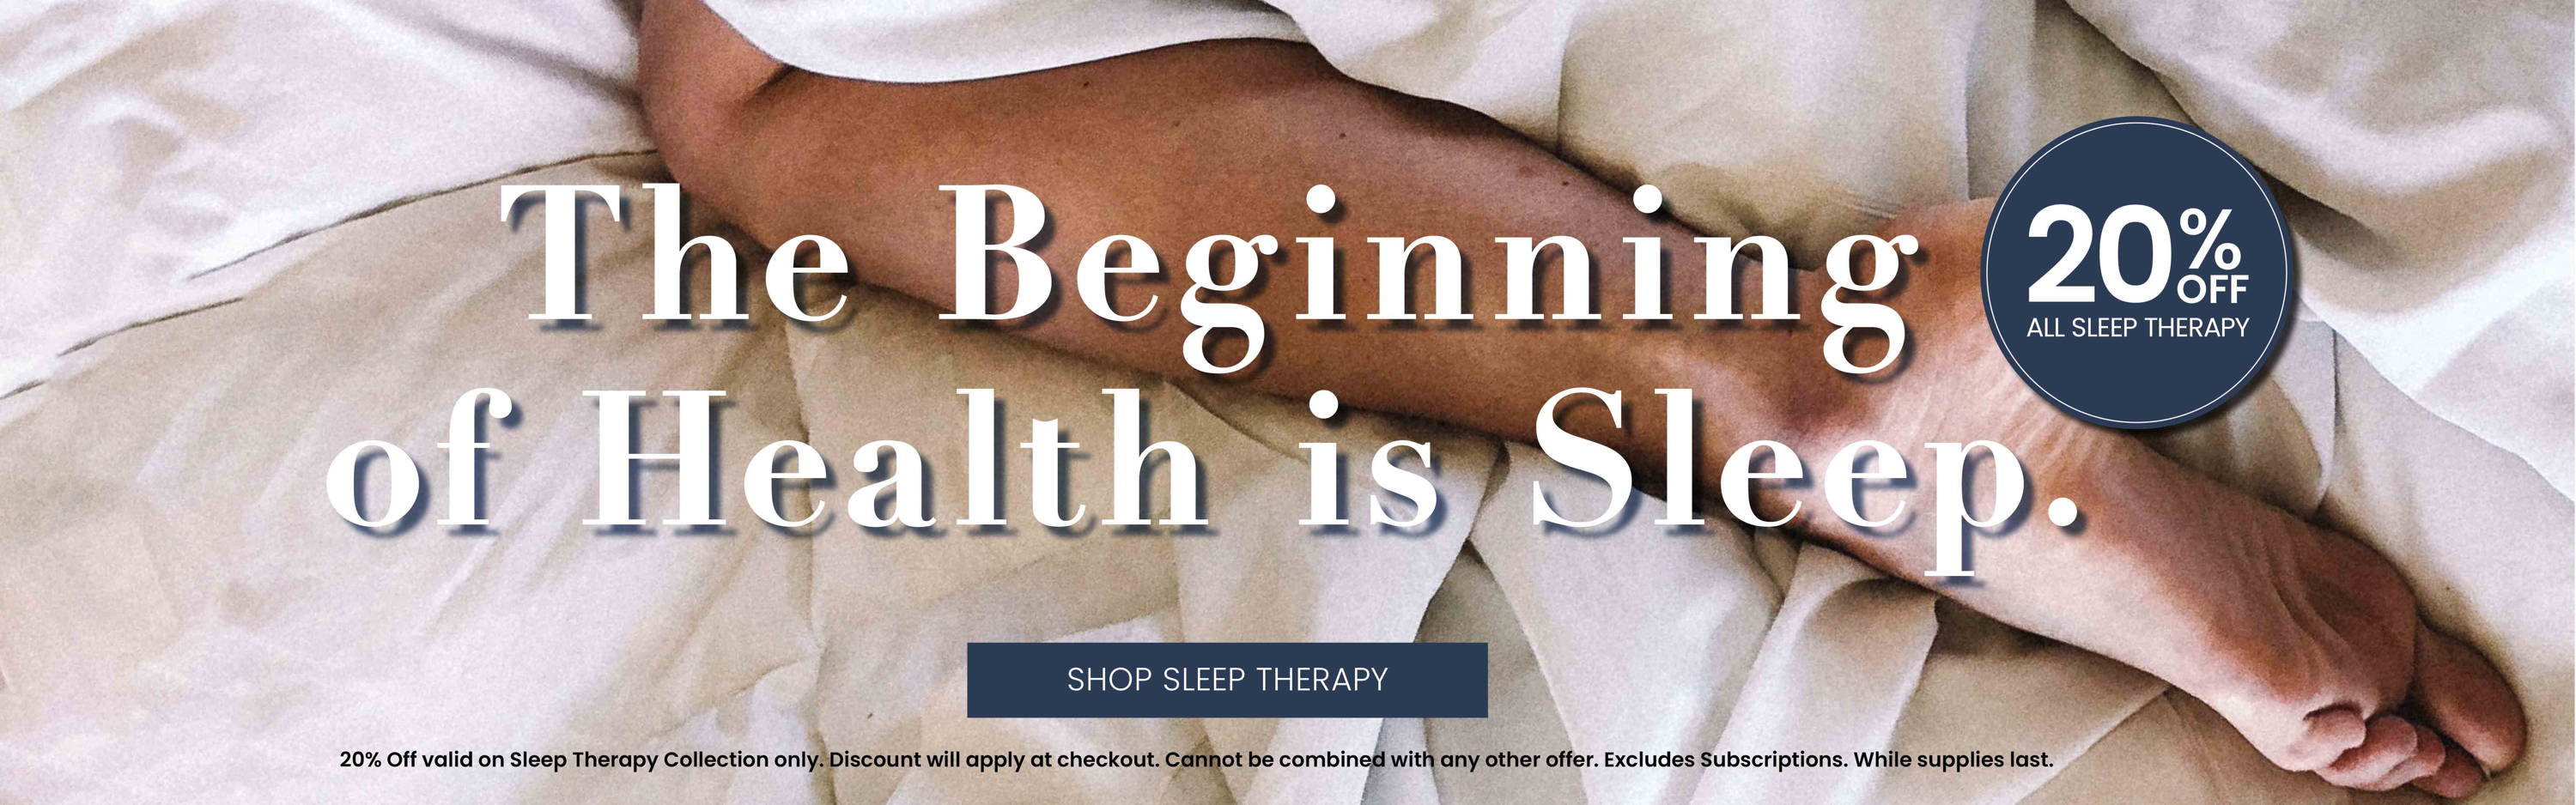 The Beginning of Health is Sleep.  20% Off All Sleep Therapy. Discount will apply at checkout. Excludes Subscriptions. While supplies last.